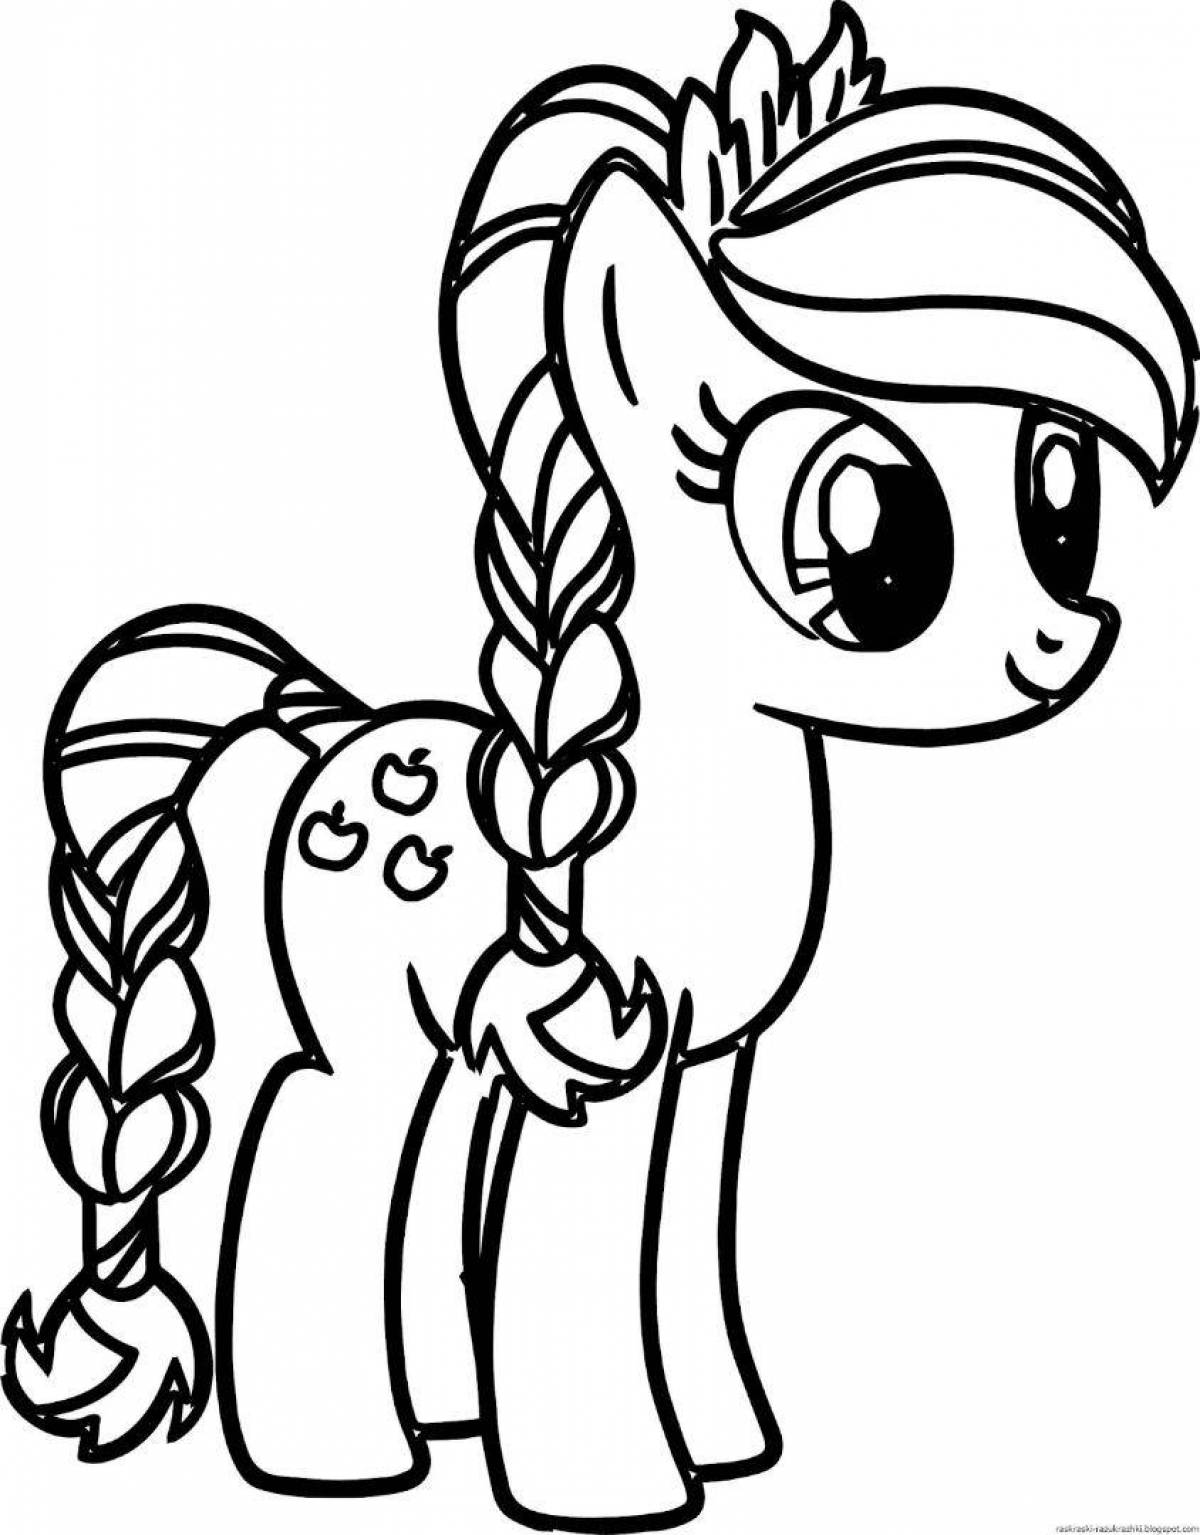 Coloring pages my little pony girls for kids